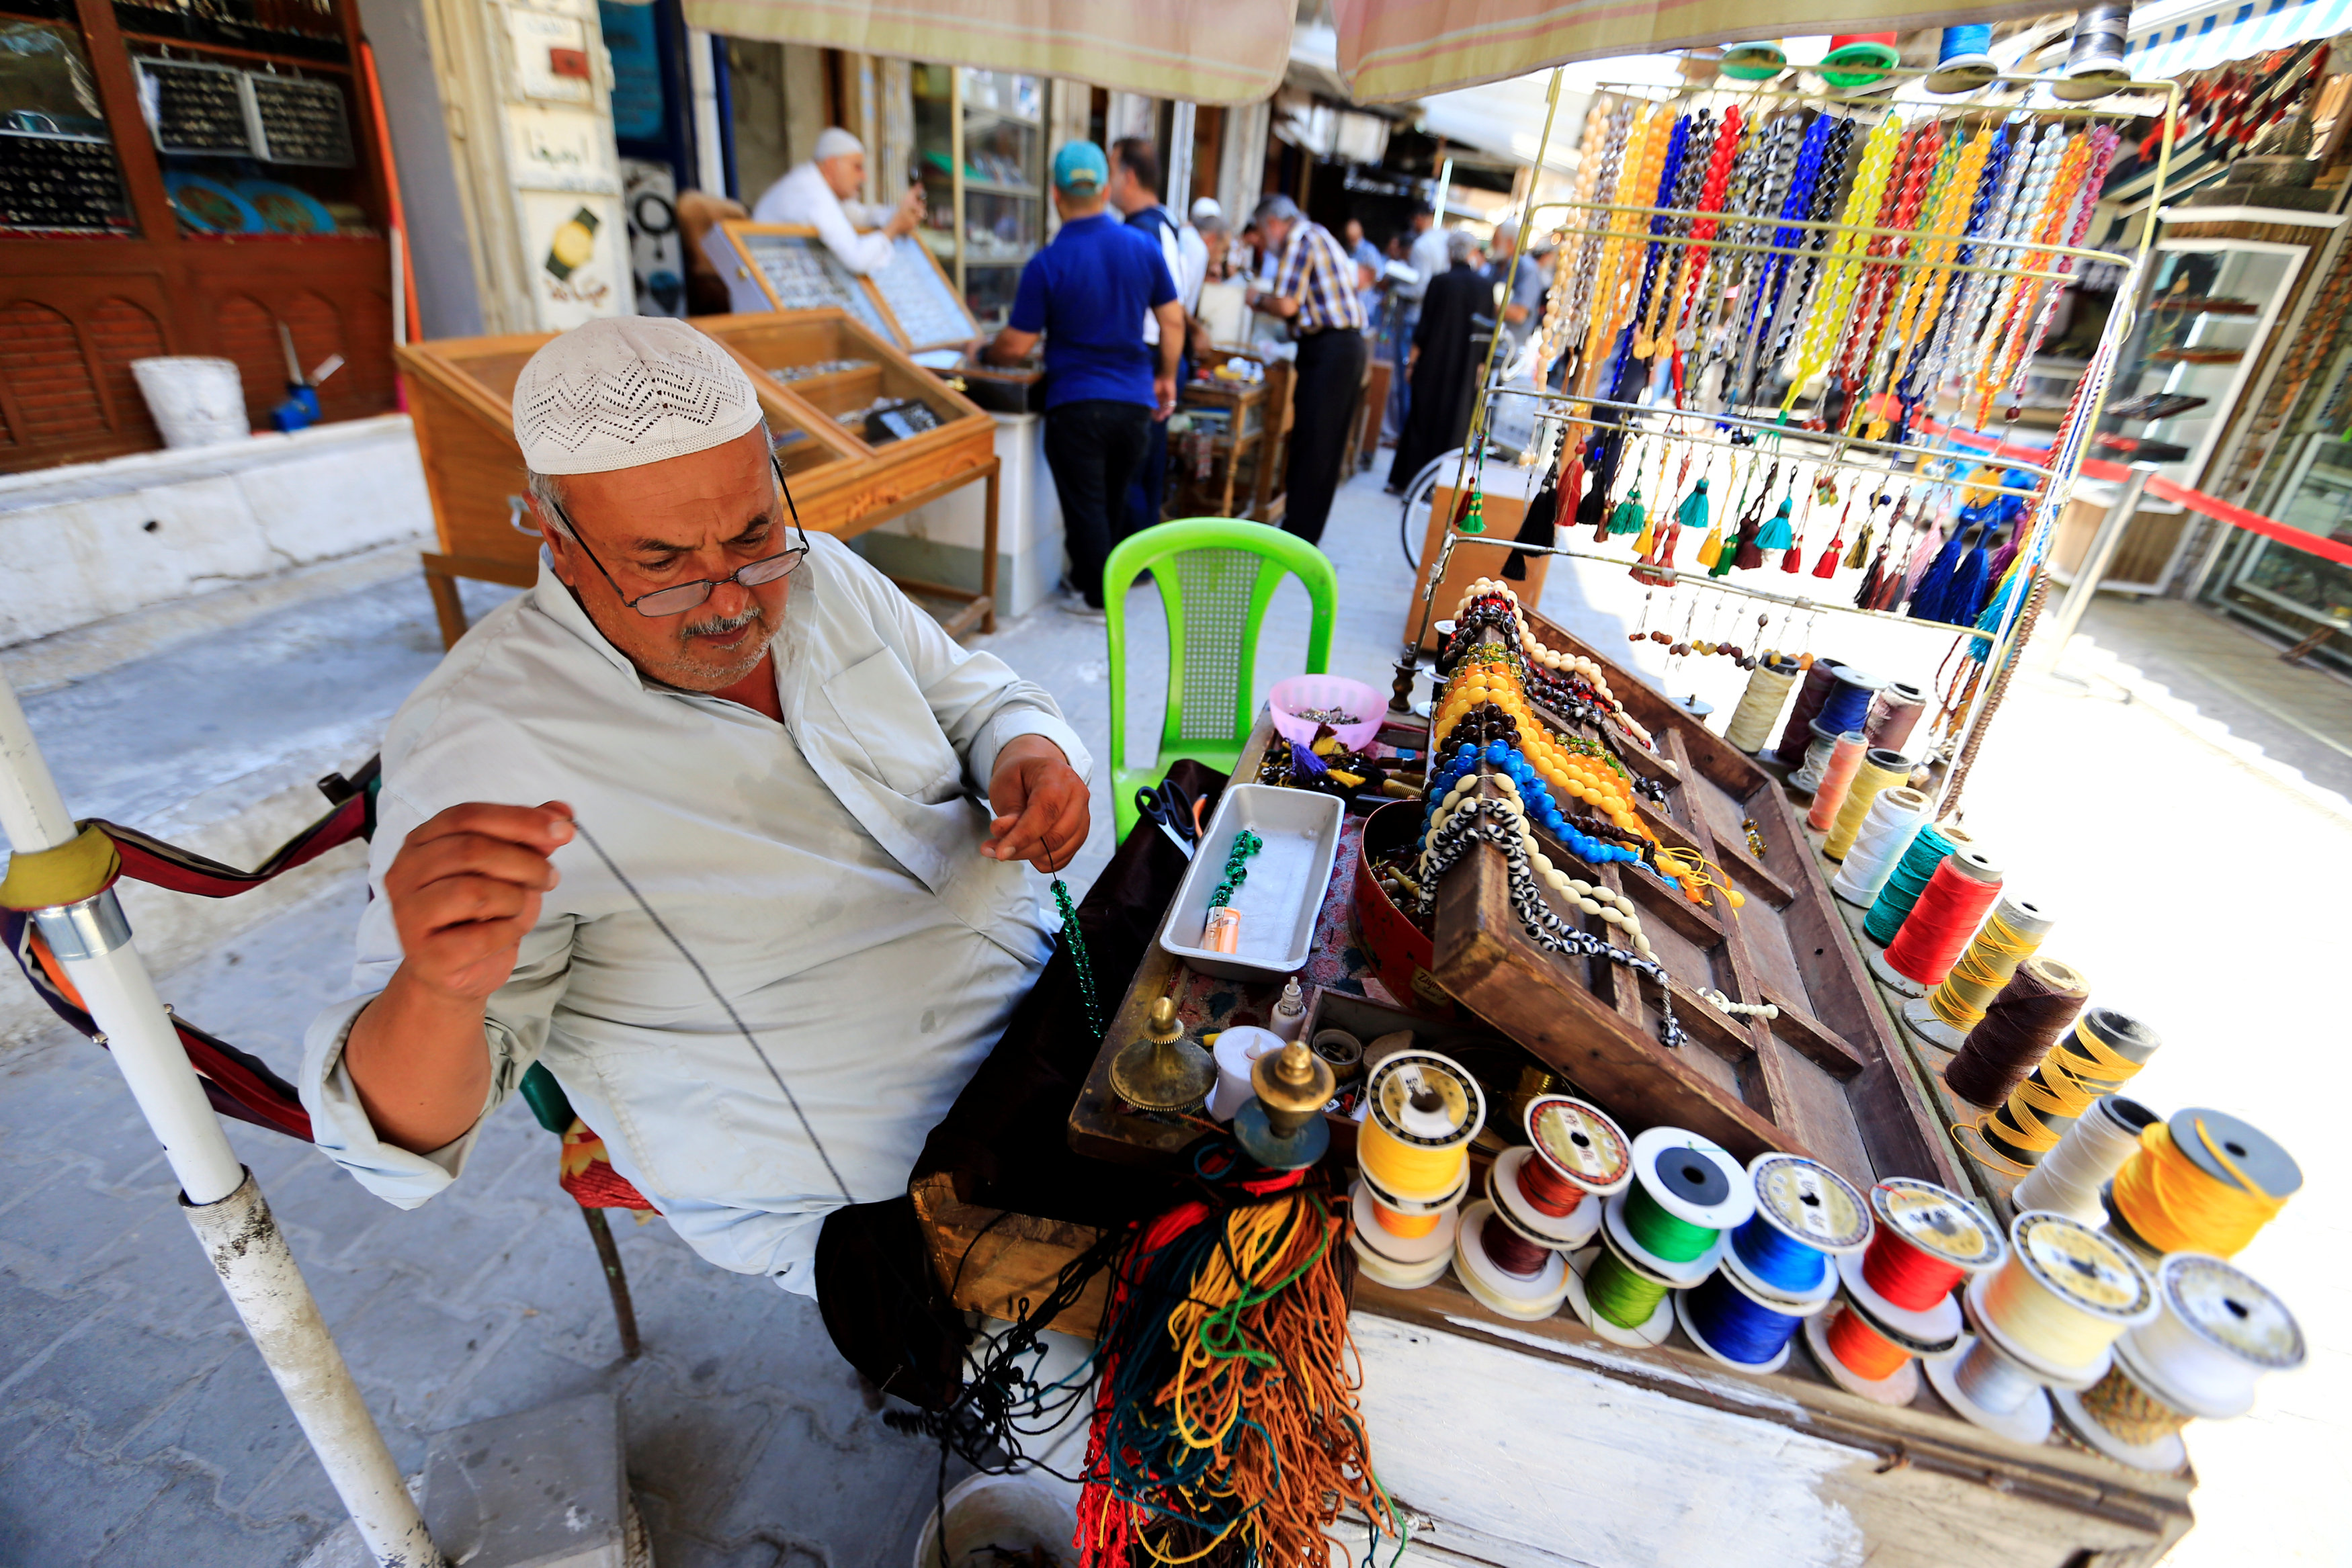 In pictures: Bead vendors at Iraq's Haraj market in Baghdad